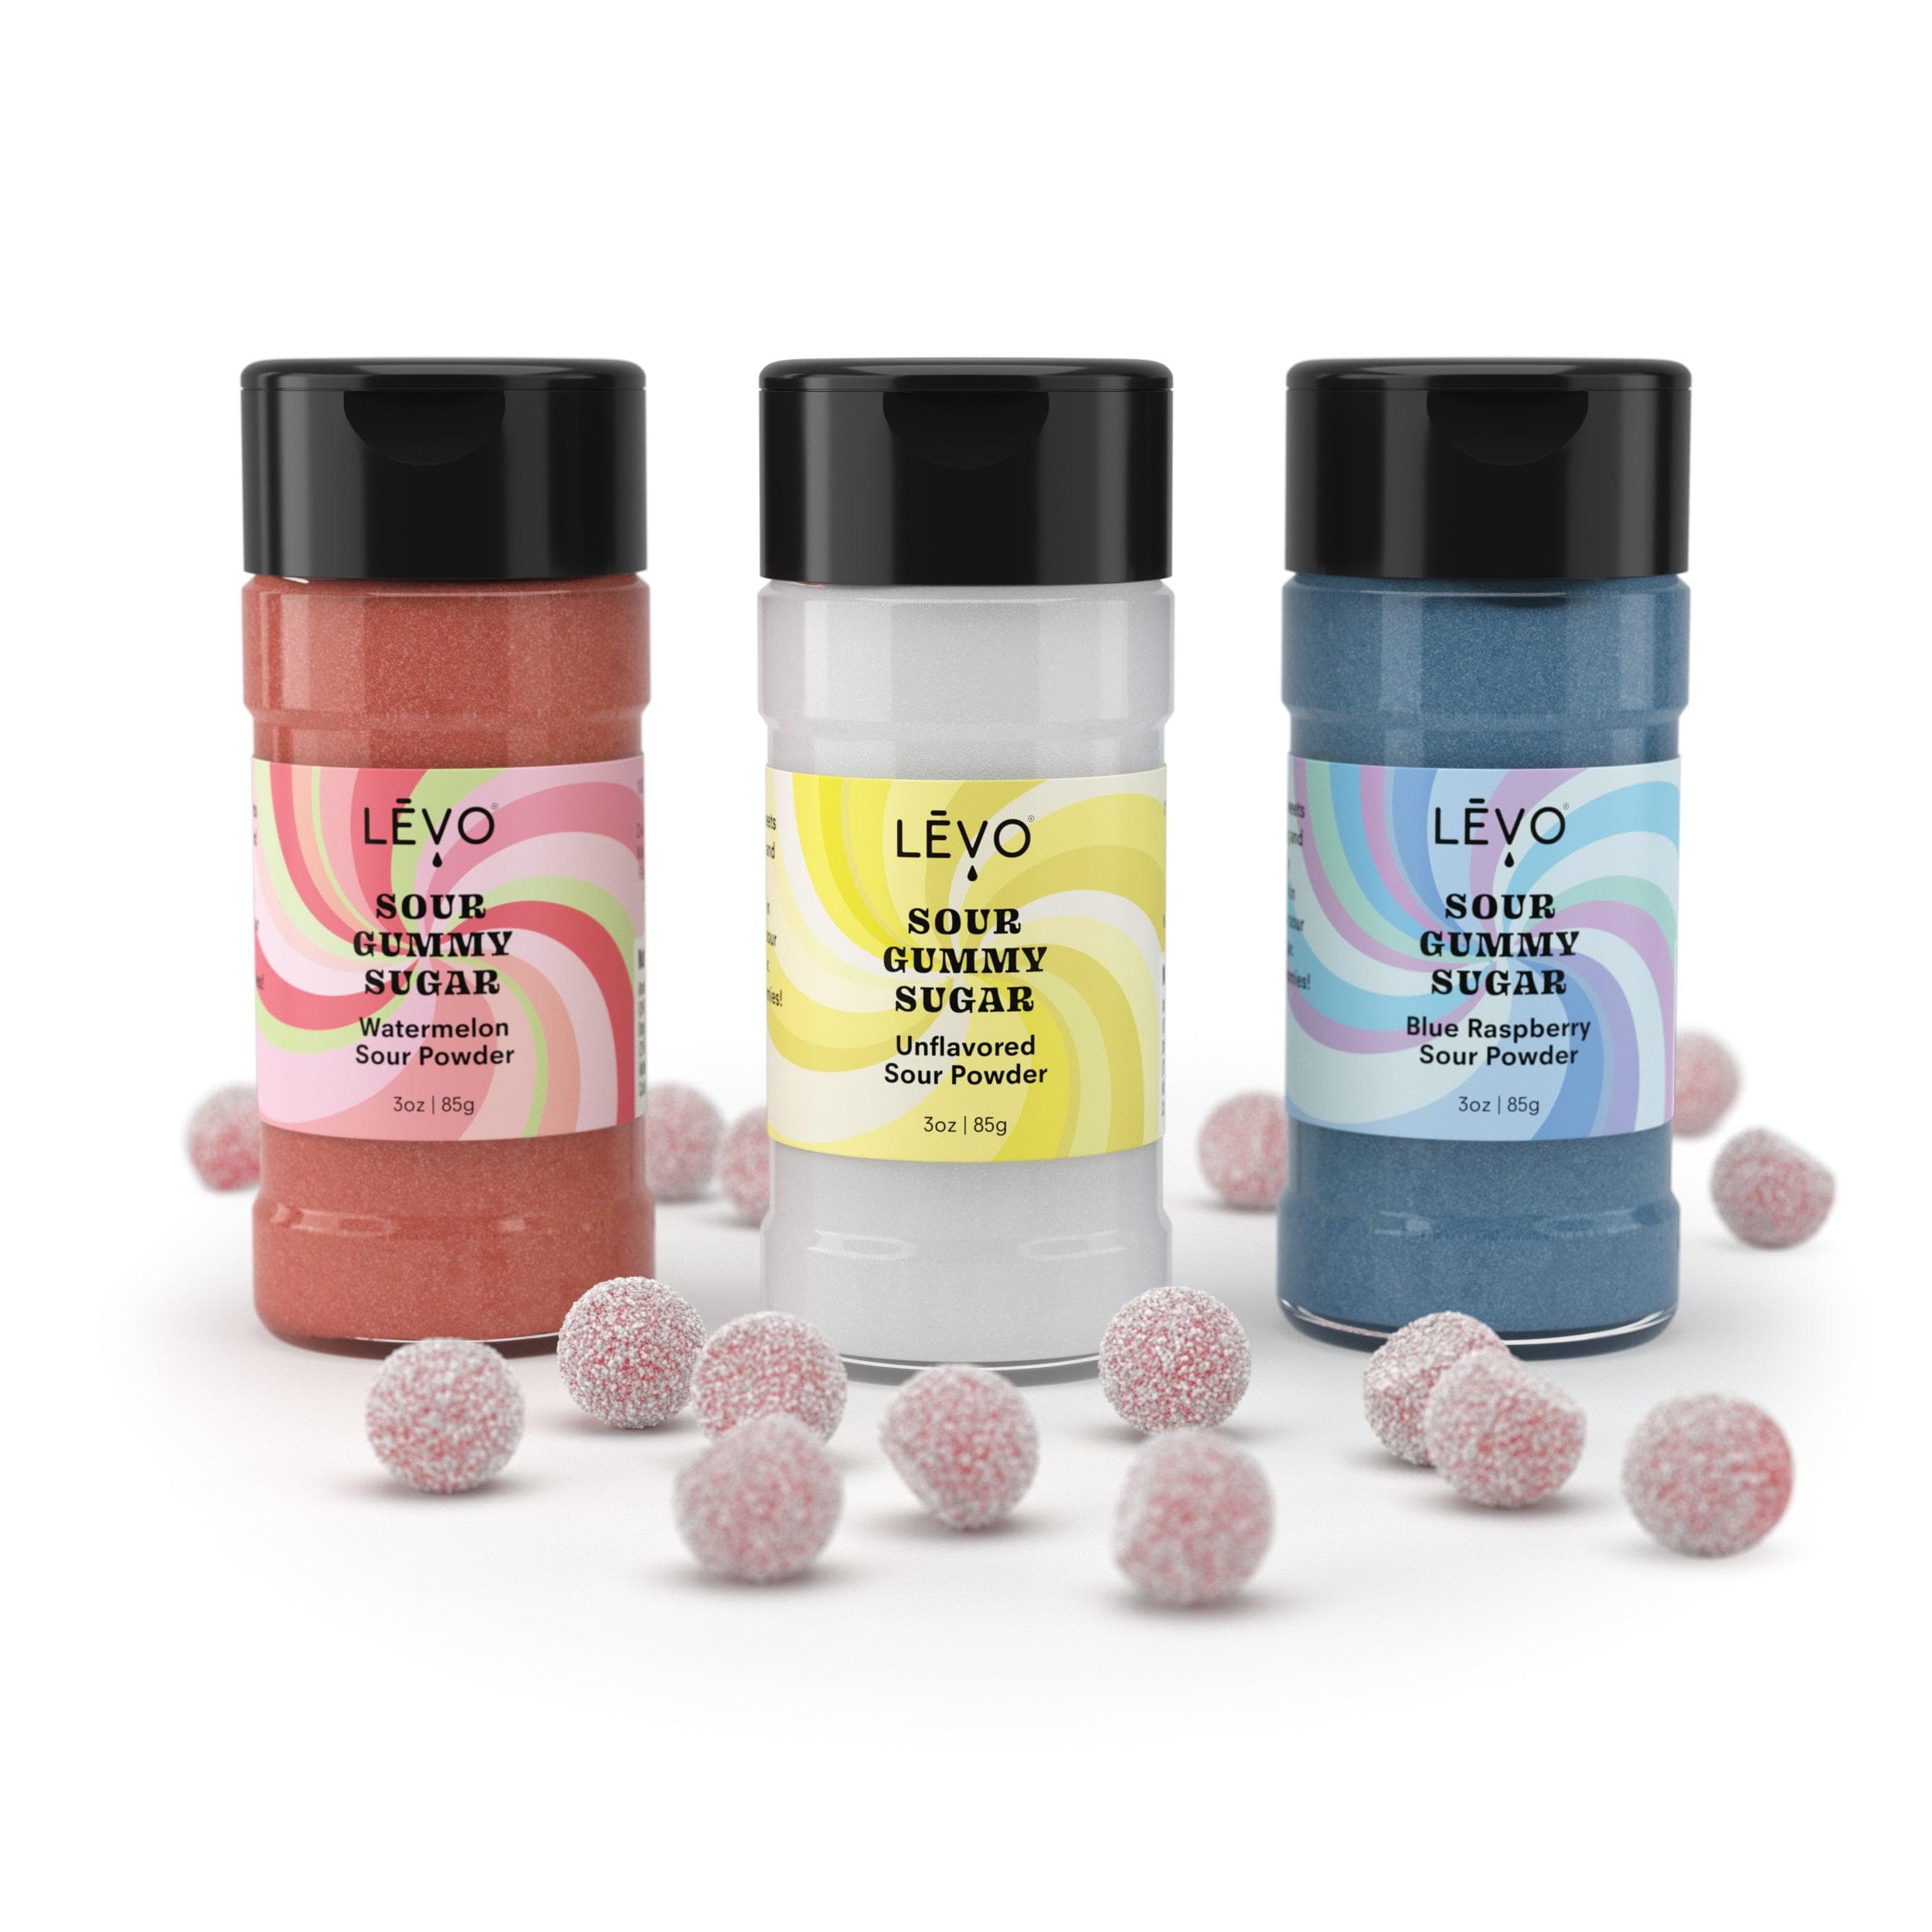 LEVO Sour gummy sugar trio in watermelon, plain, and blue raspberry with coated gummy edible candy. Elevate your sweets with the Sour Gummy Sugar Trio featuring Unflavored, Watermelon, and Blue Raspberry flavors.